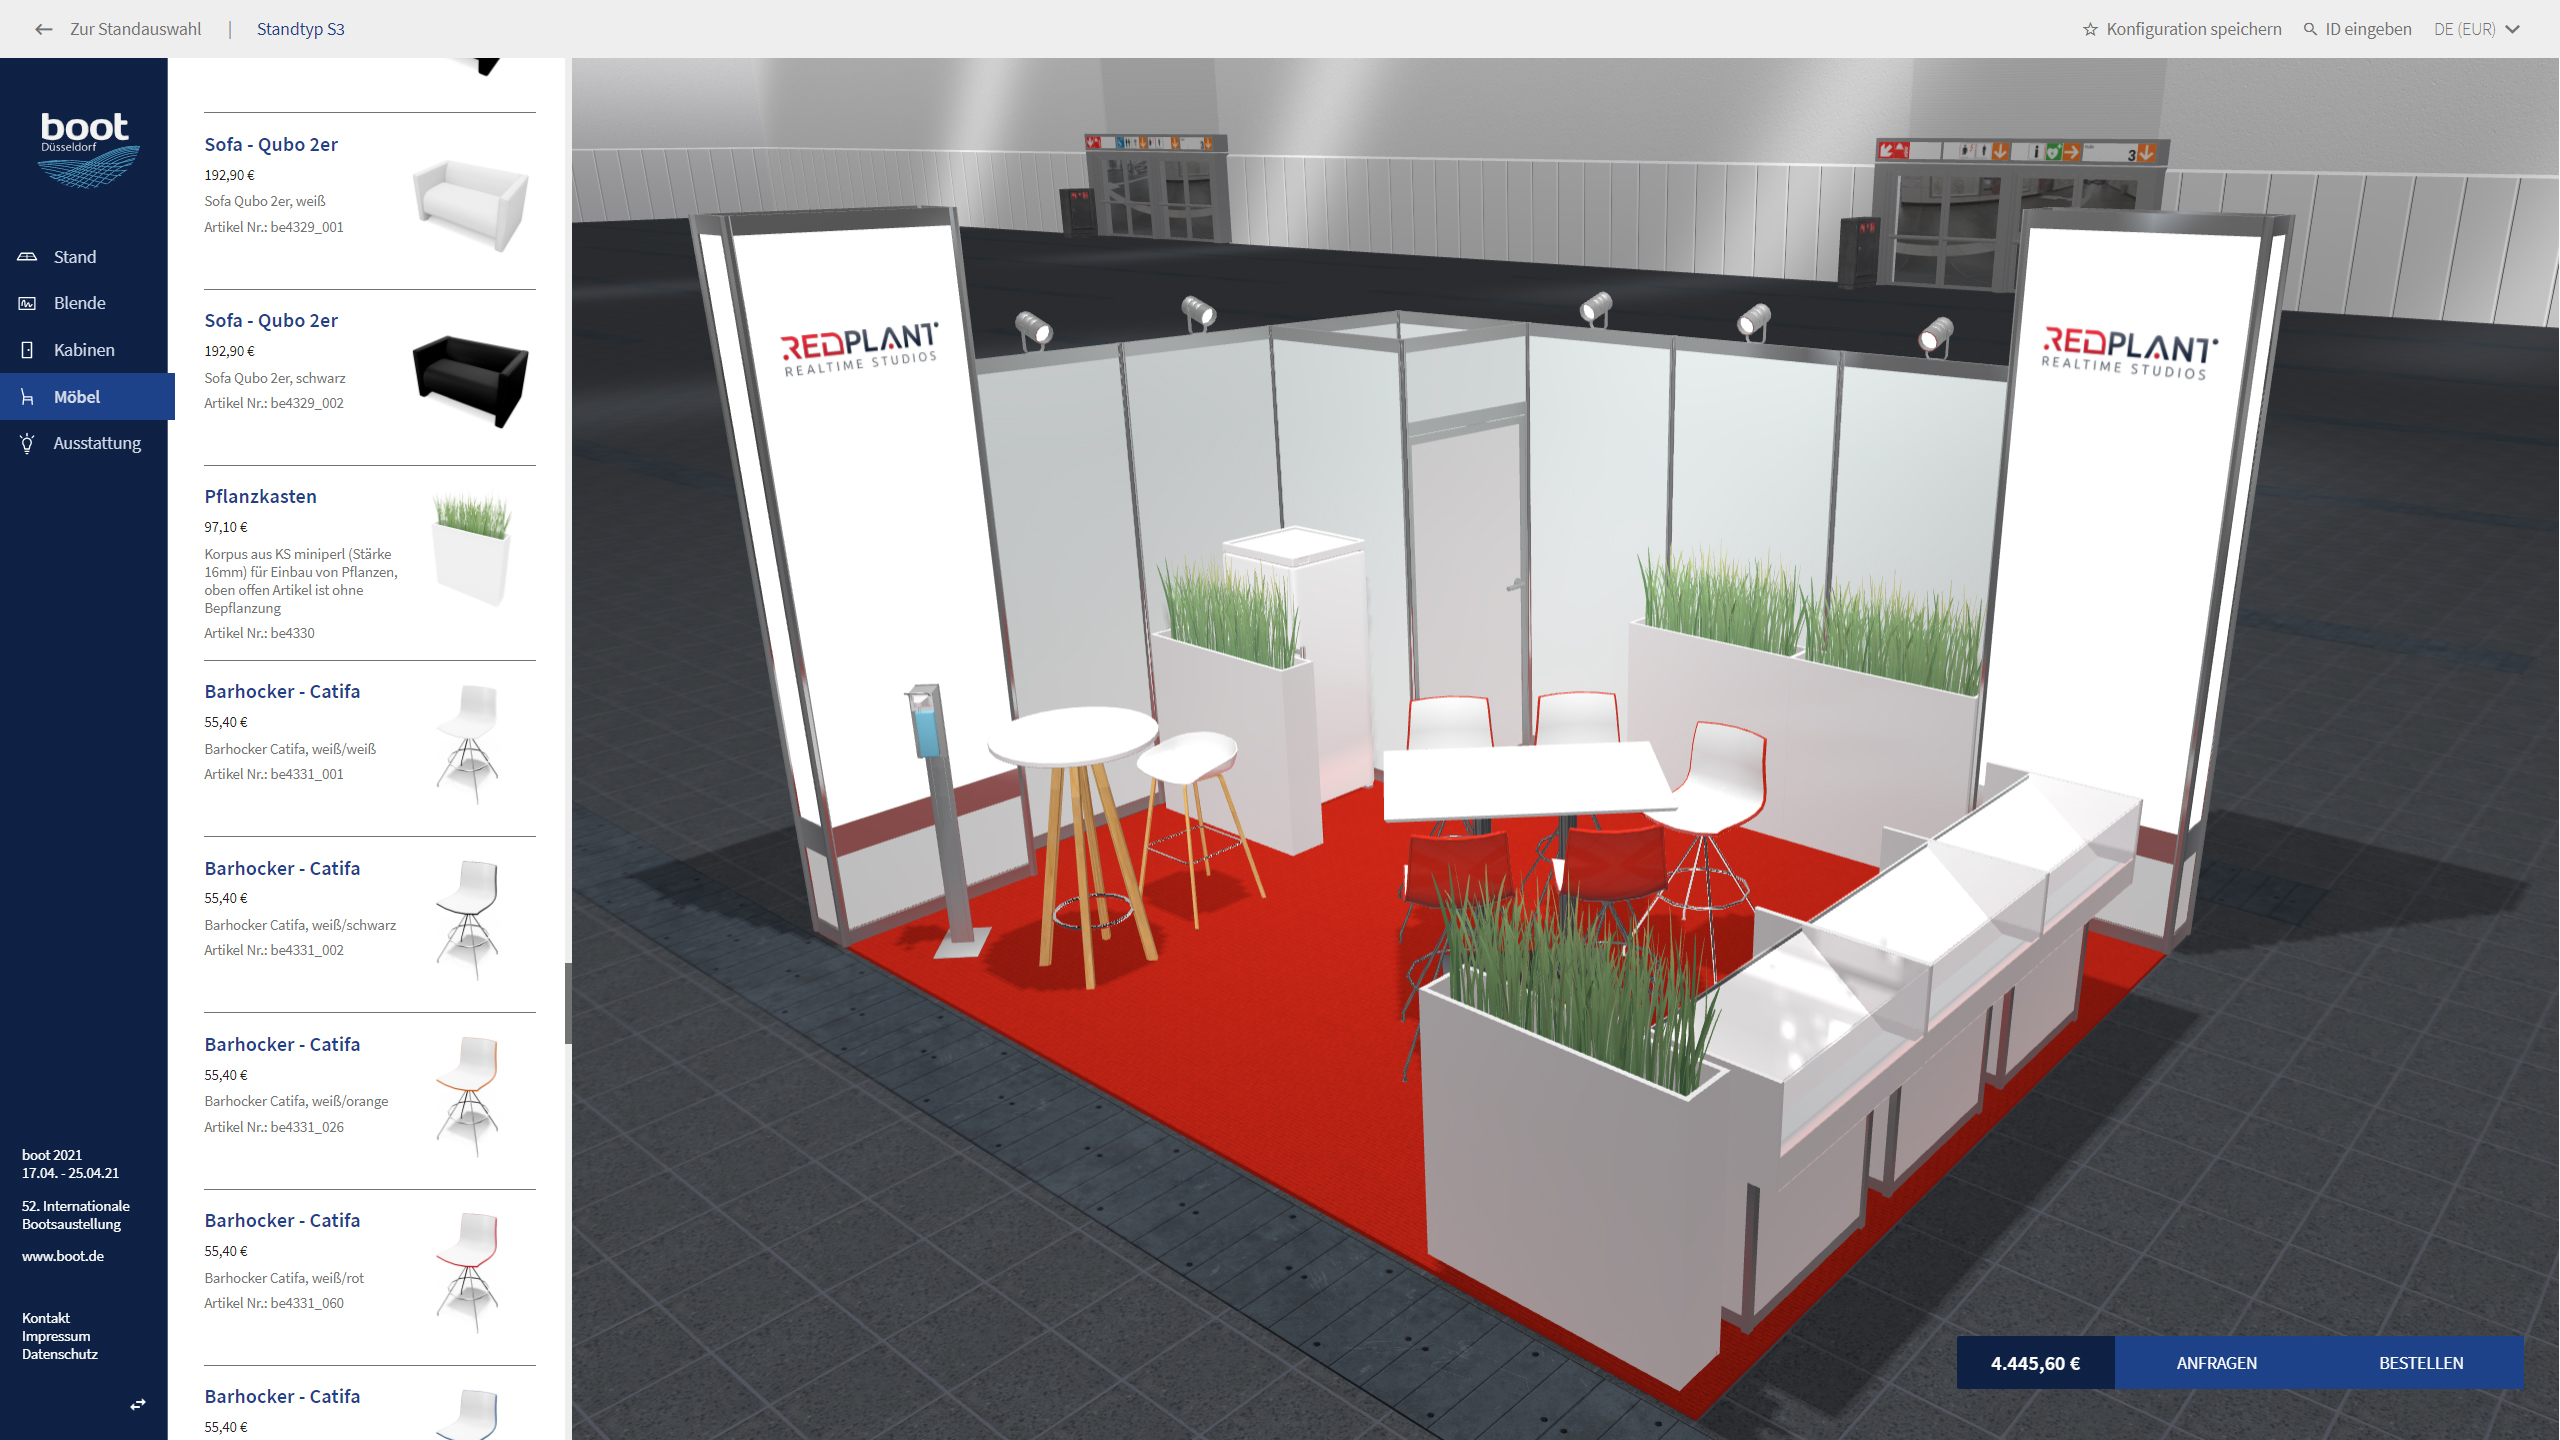 konfigurator webgl carousel stand construction S3 color red messe duesseldorf